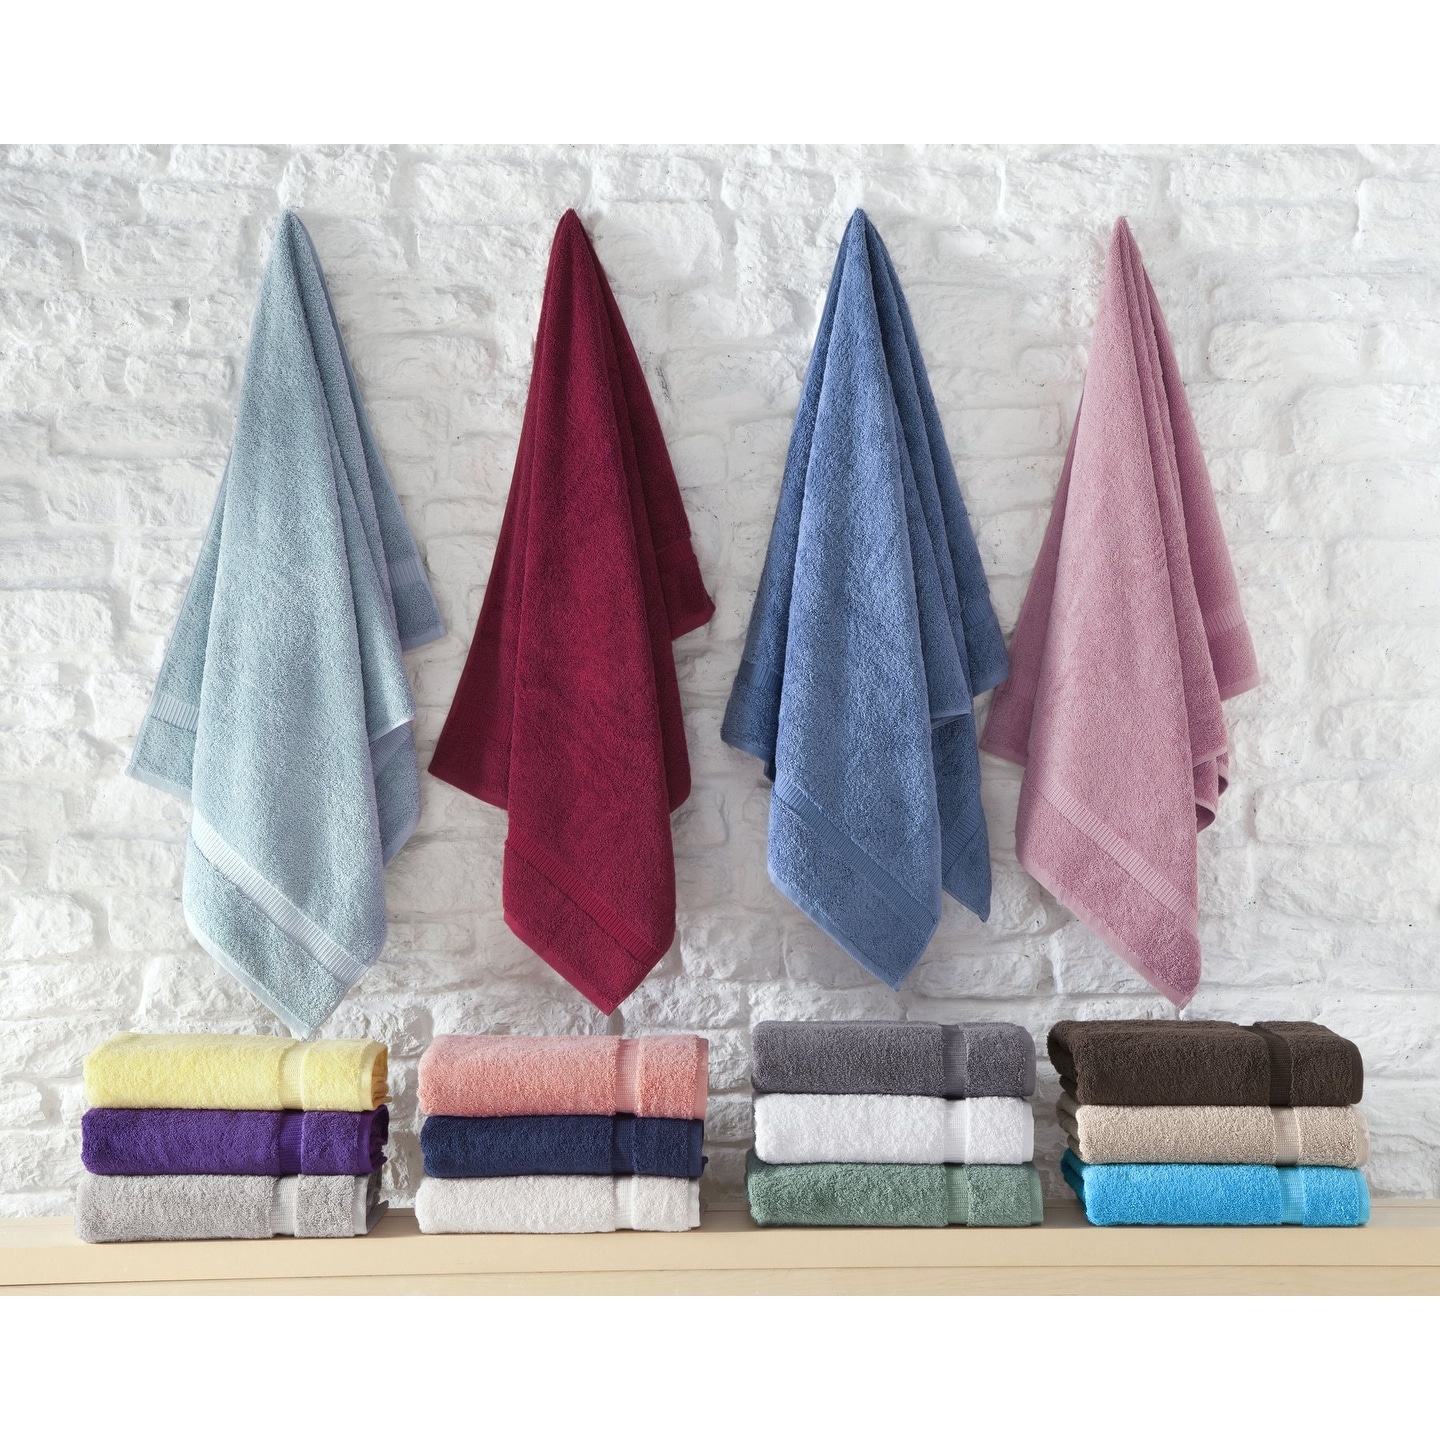 https://ak1.ostkcdn.com/images/products/is/images/direct/fd167586ff1b58c5a77d4dc7e970eb1d35265150/Royal-Turkish-Cotton-Towel-Soft-and-Luxury-700-GSM-Bath-Towels-Set-of-4.jpg